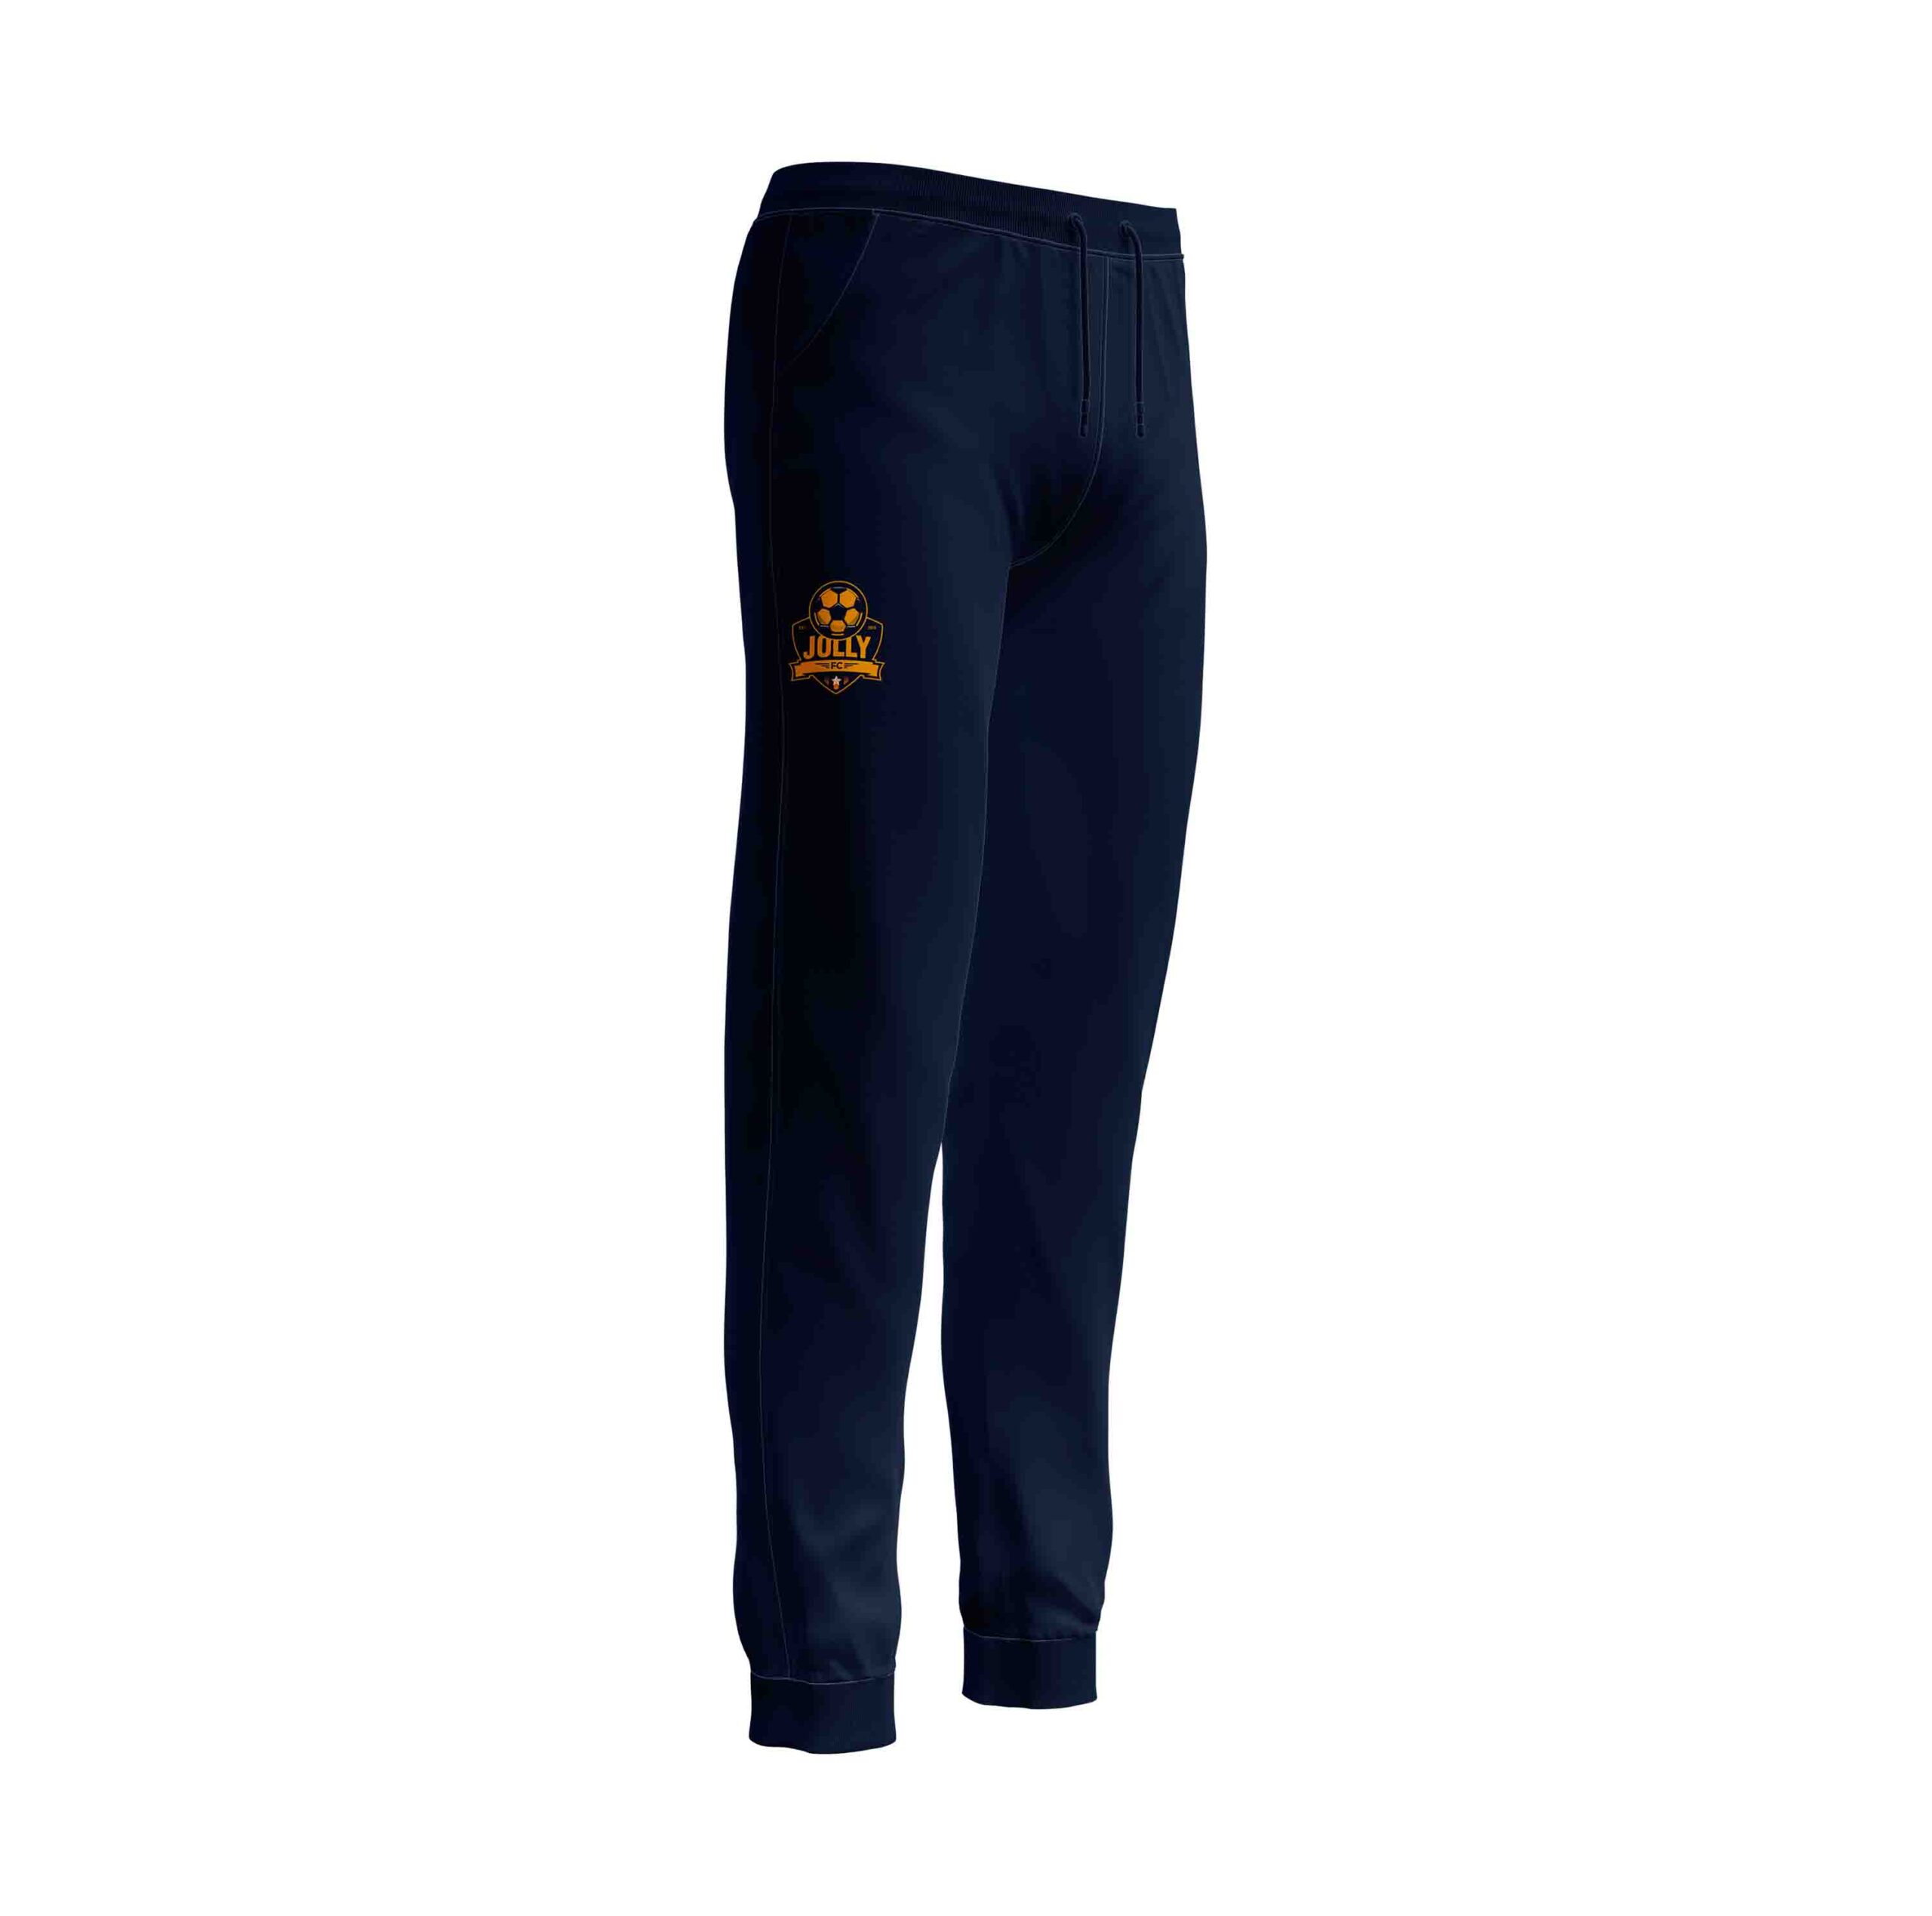 Jolly F.C. joggers side